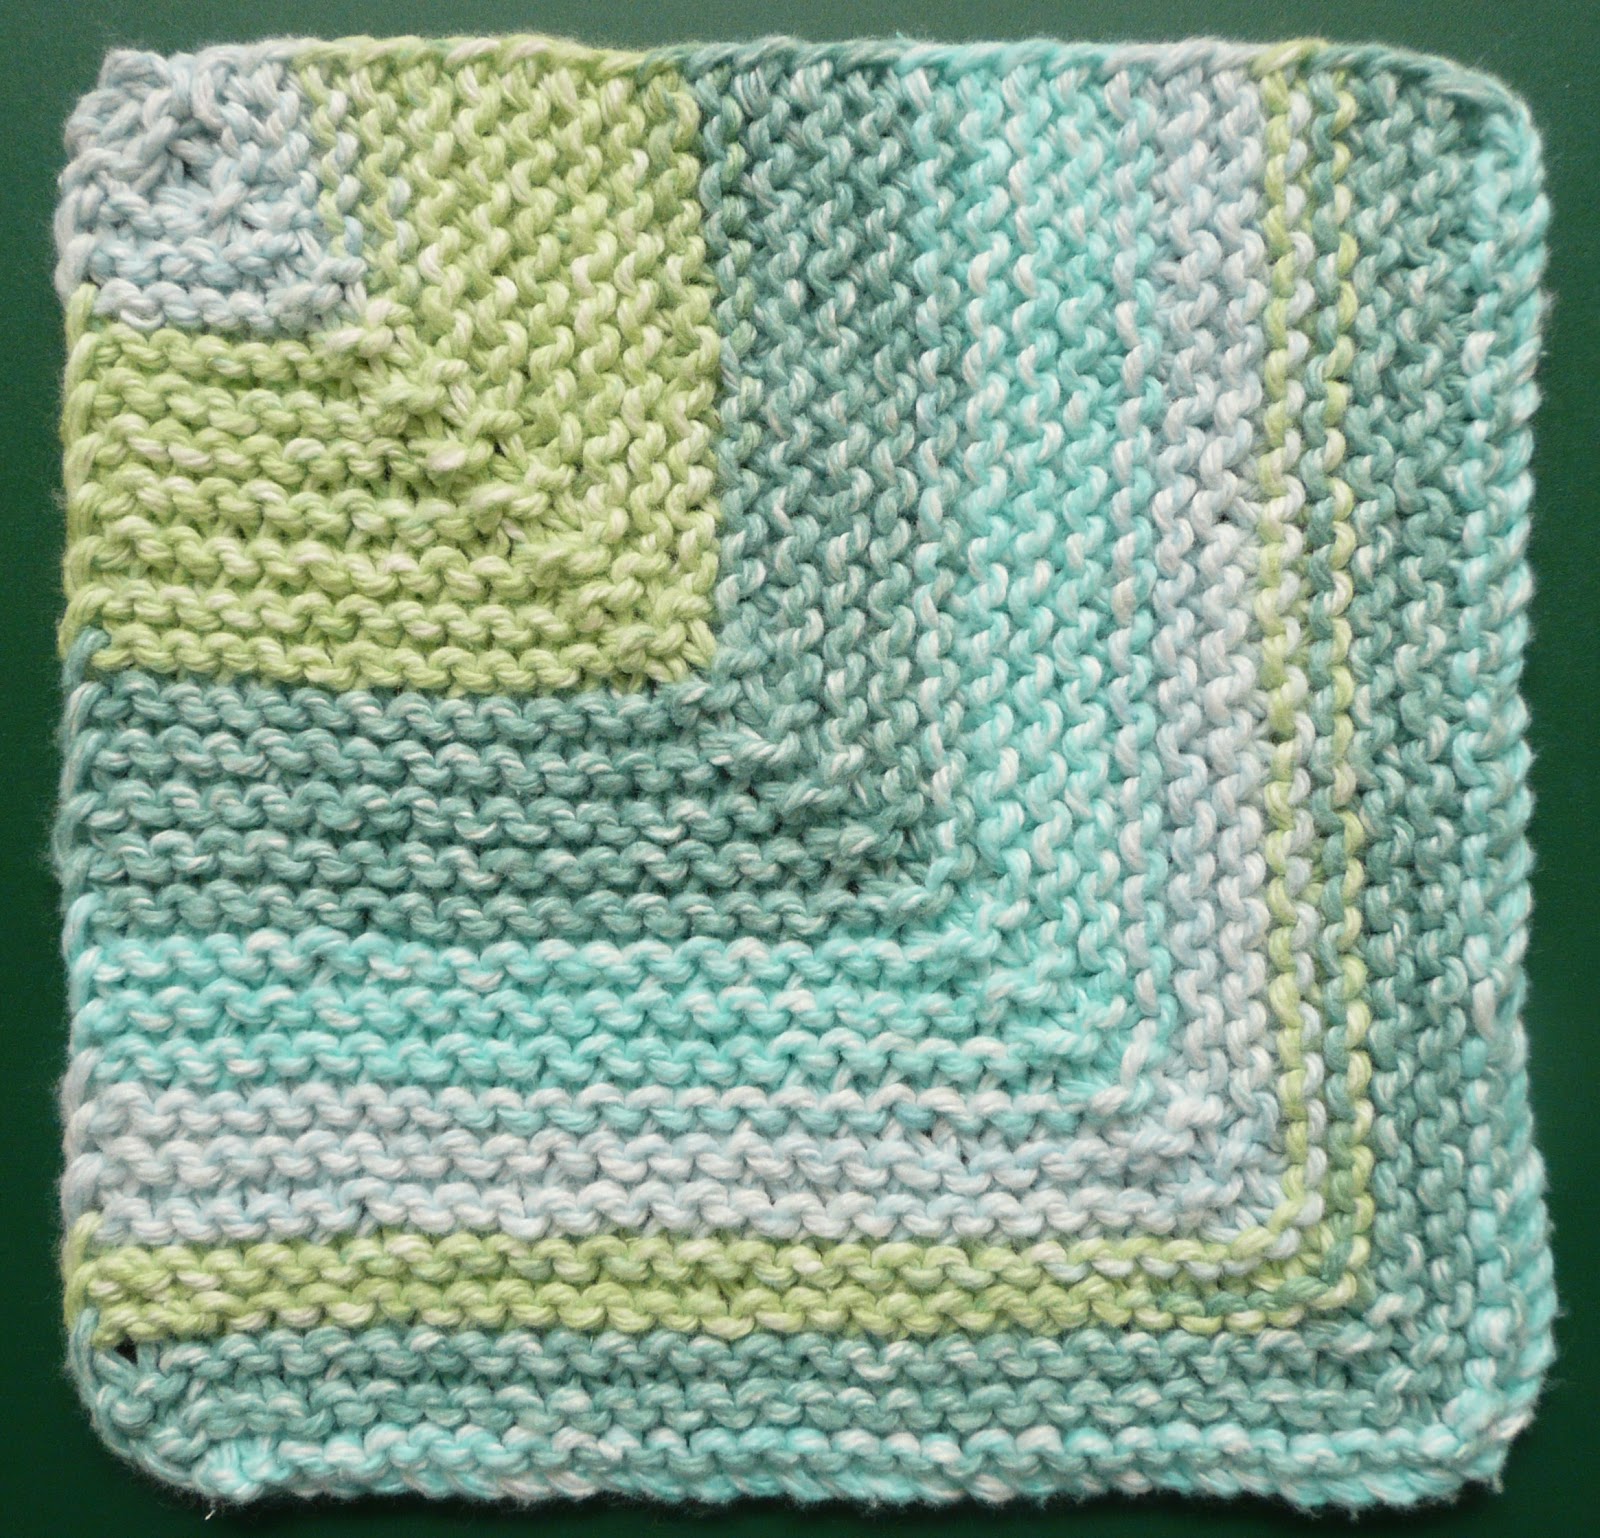 Orson Gygi - The dish cloth. A simple small square of fabric ready